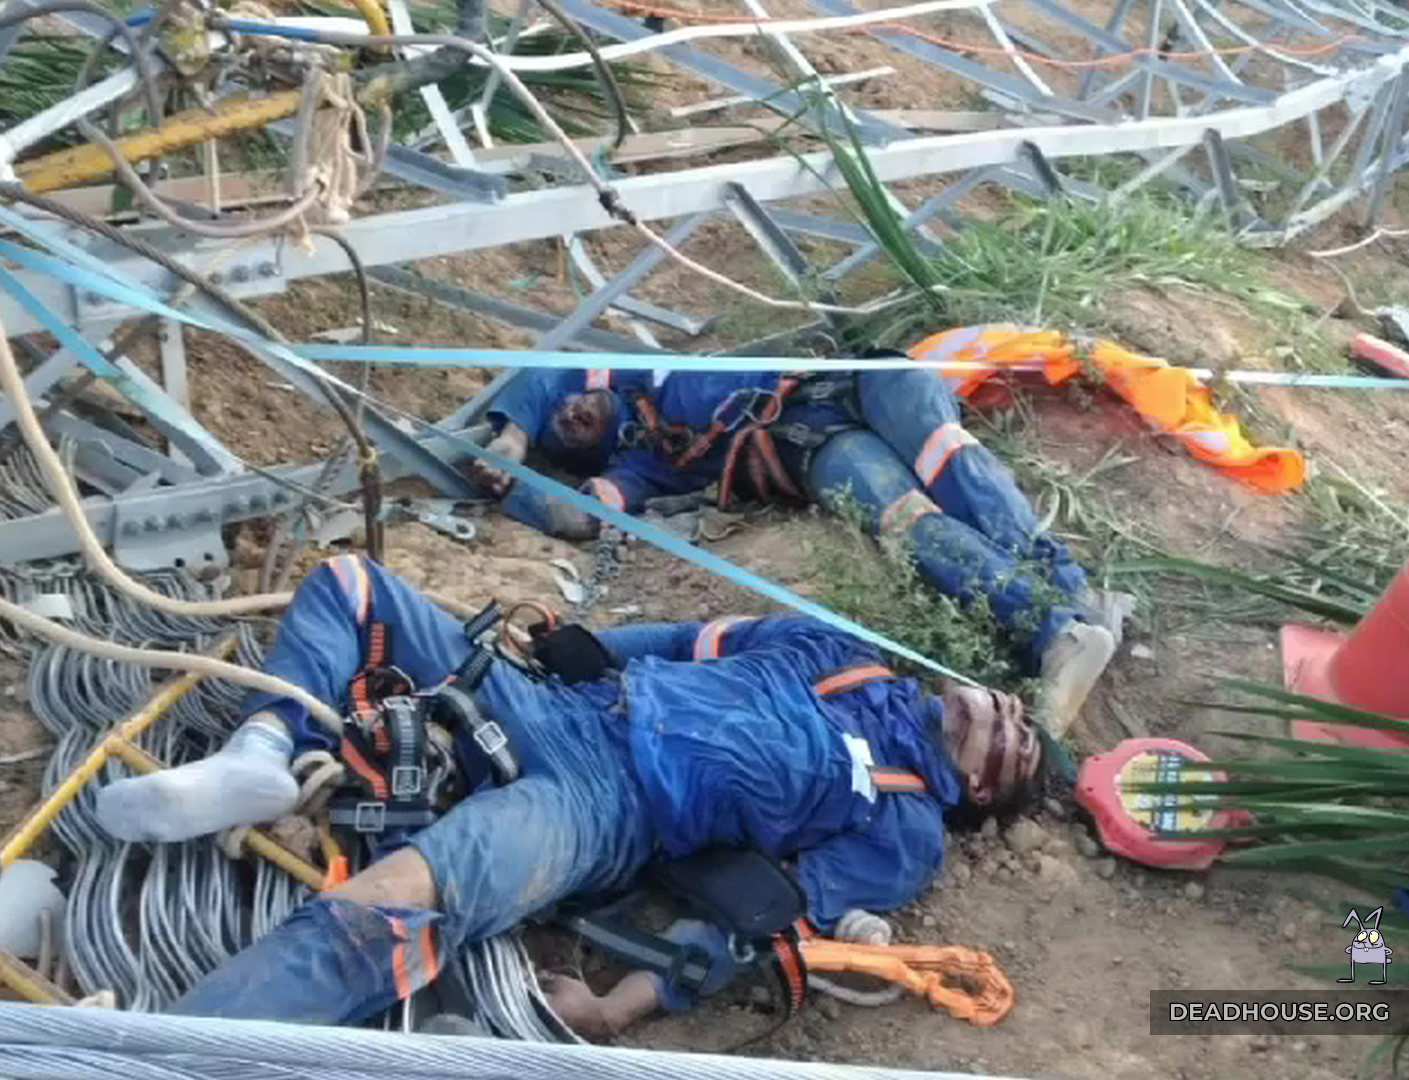 Catastrophe in Brazil. The corpses of the workers